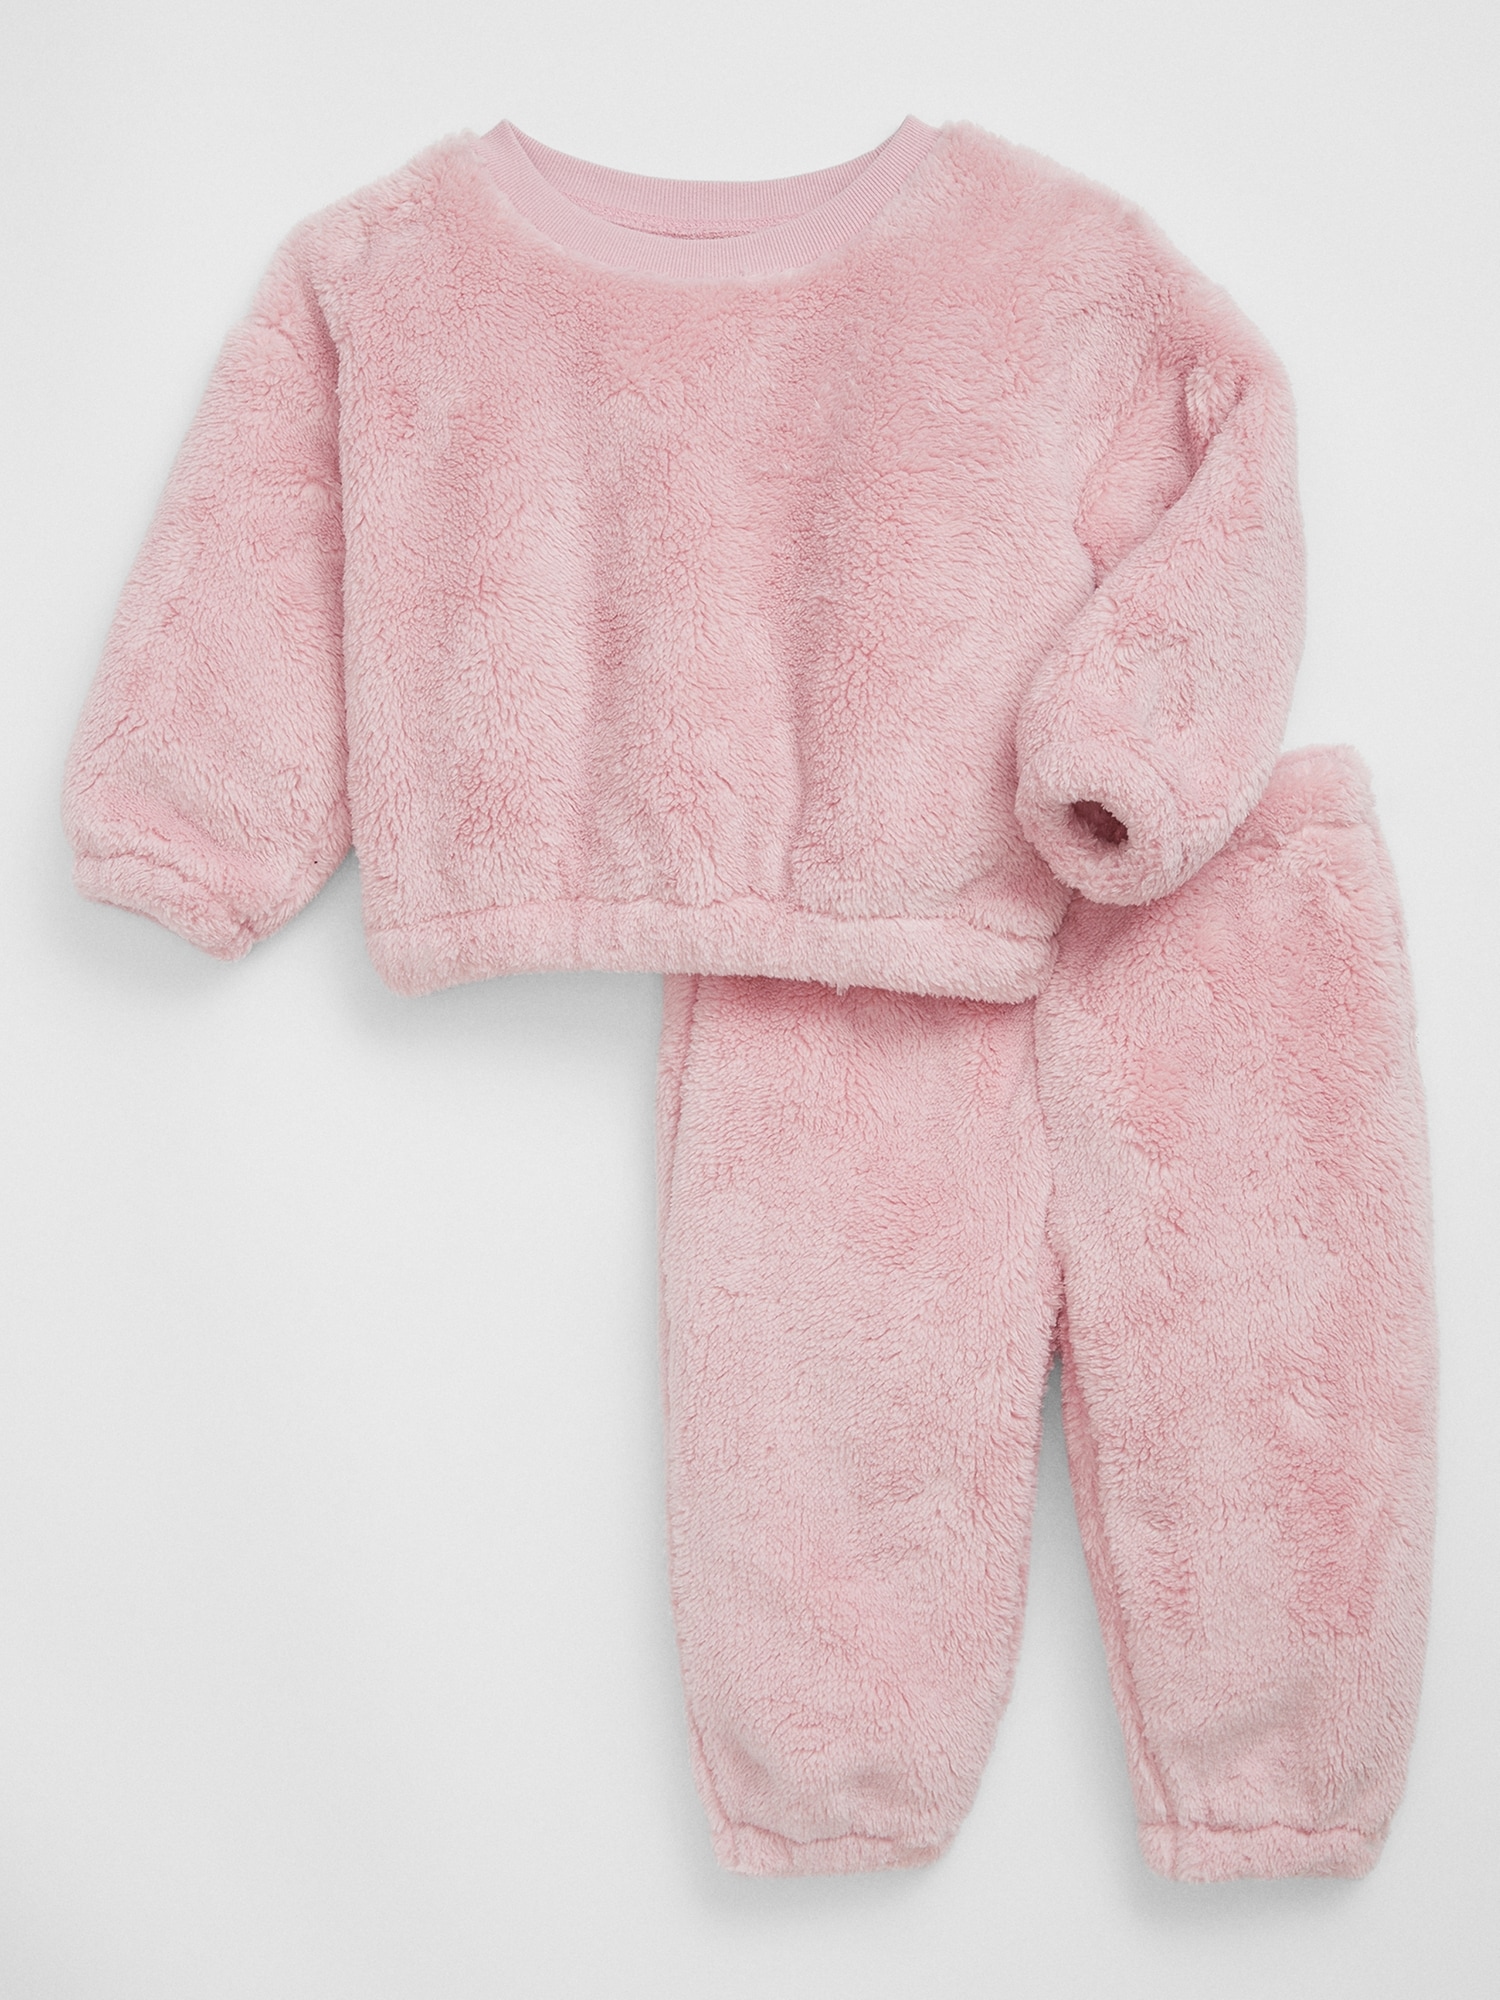 Baby Sherpa Two-Piece Outfit Set